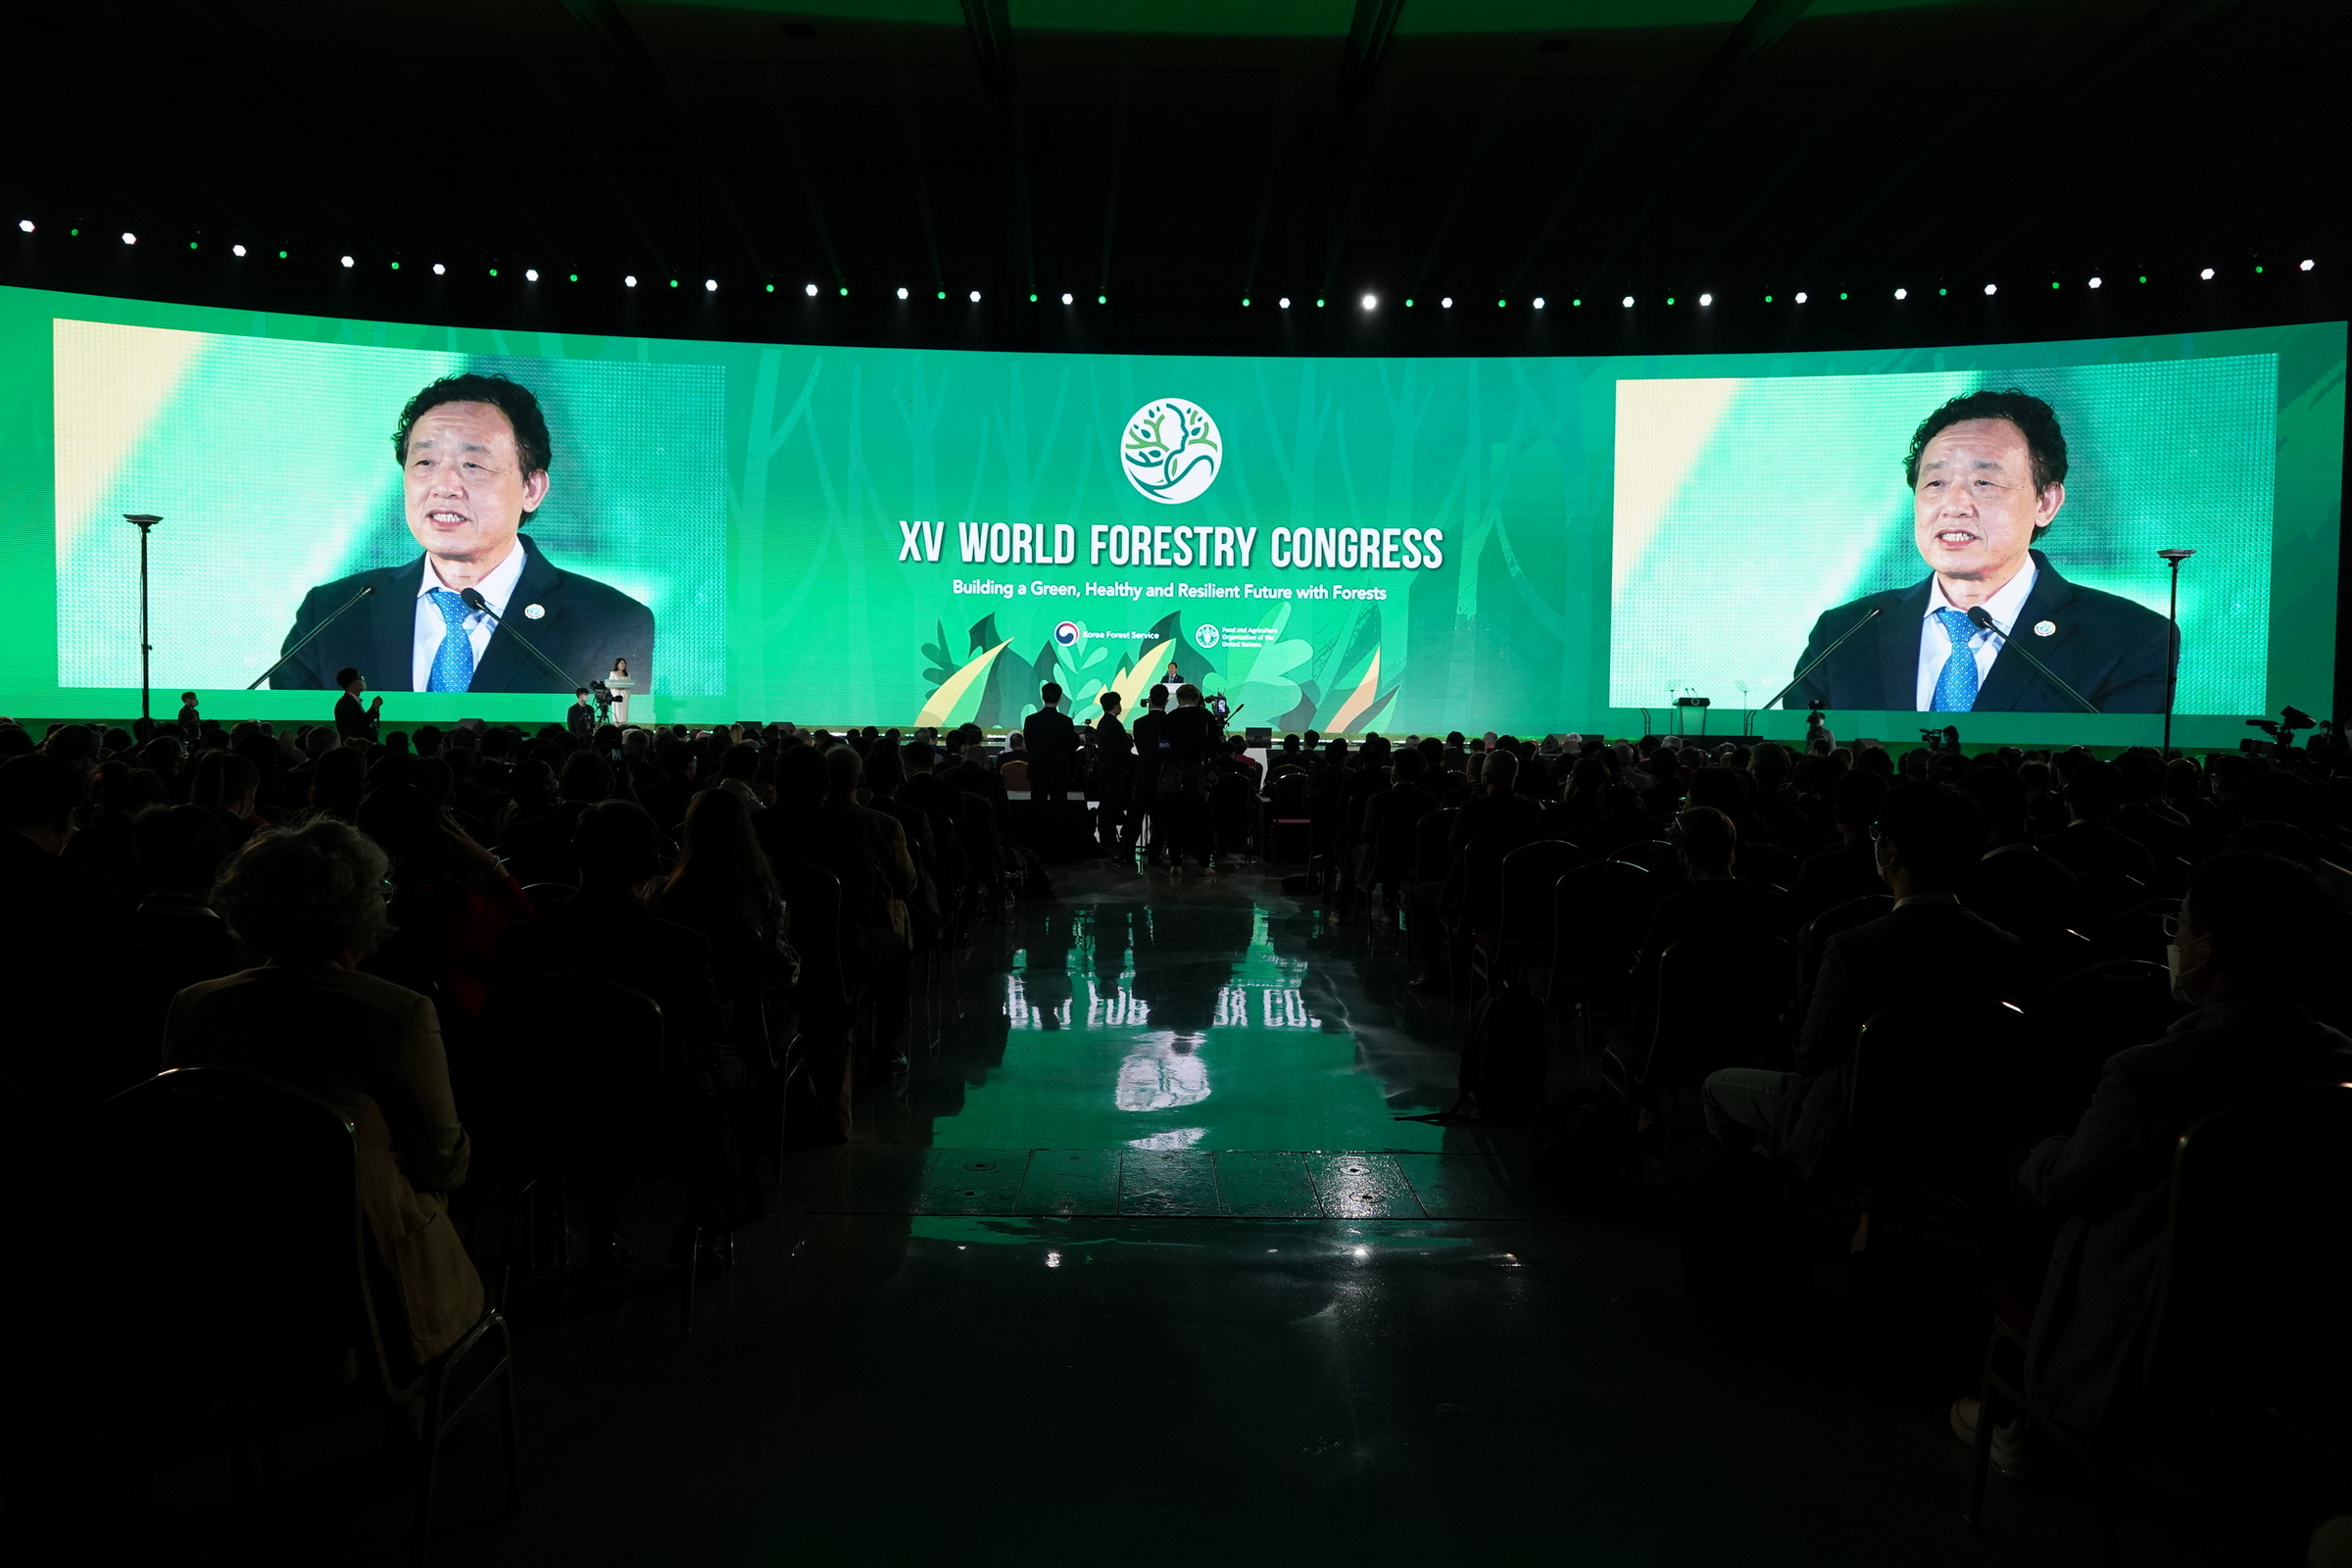 XV World Forestry Congress Ends with Great Success 이미지3